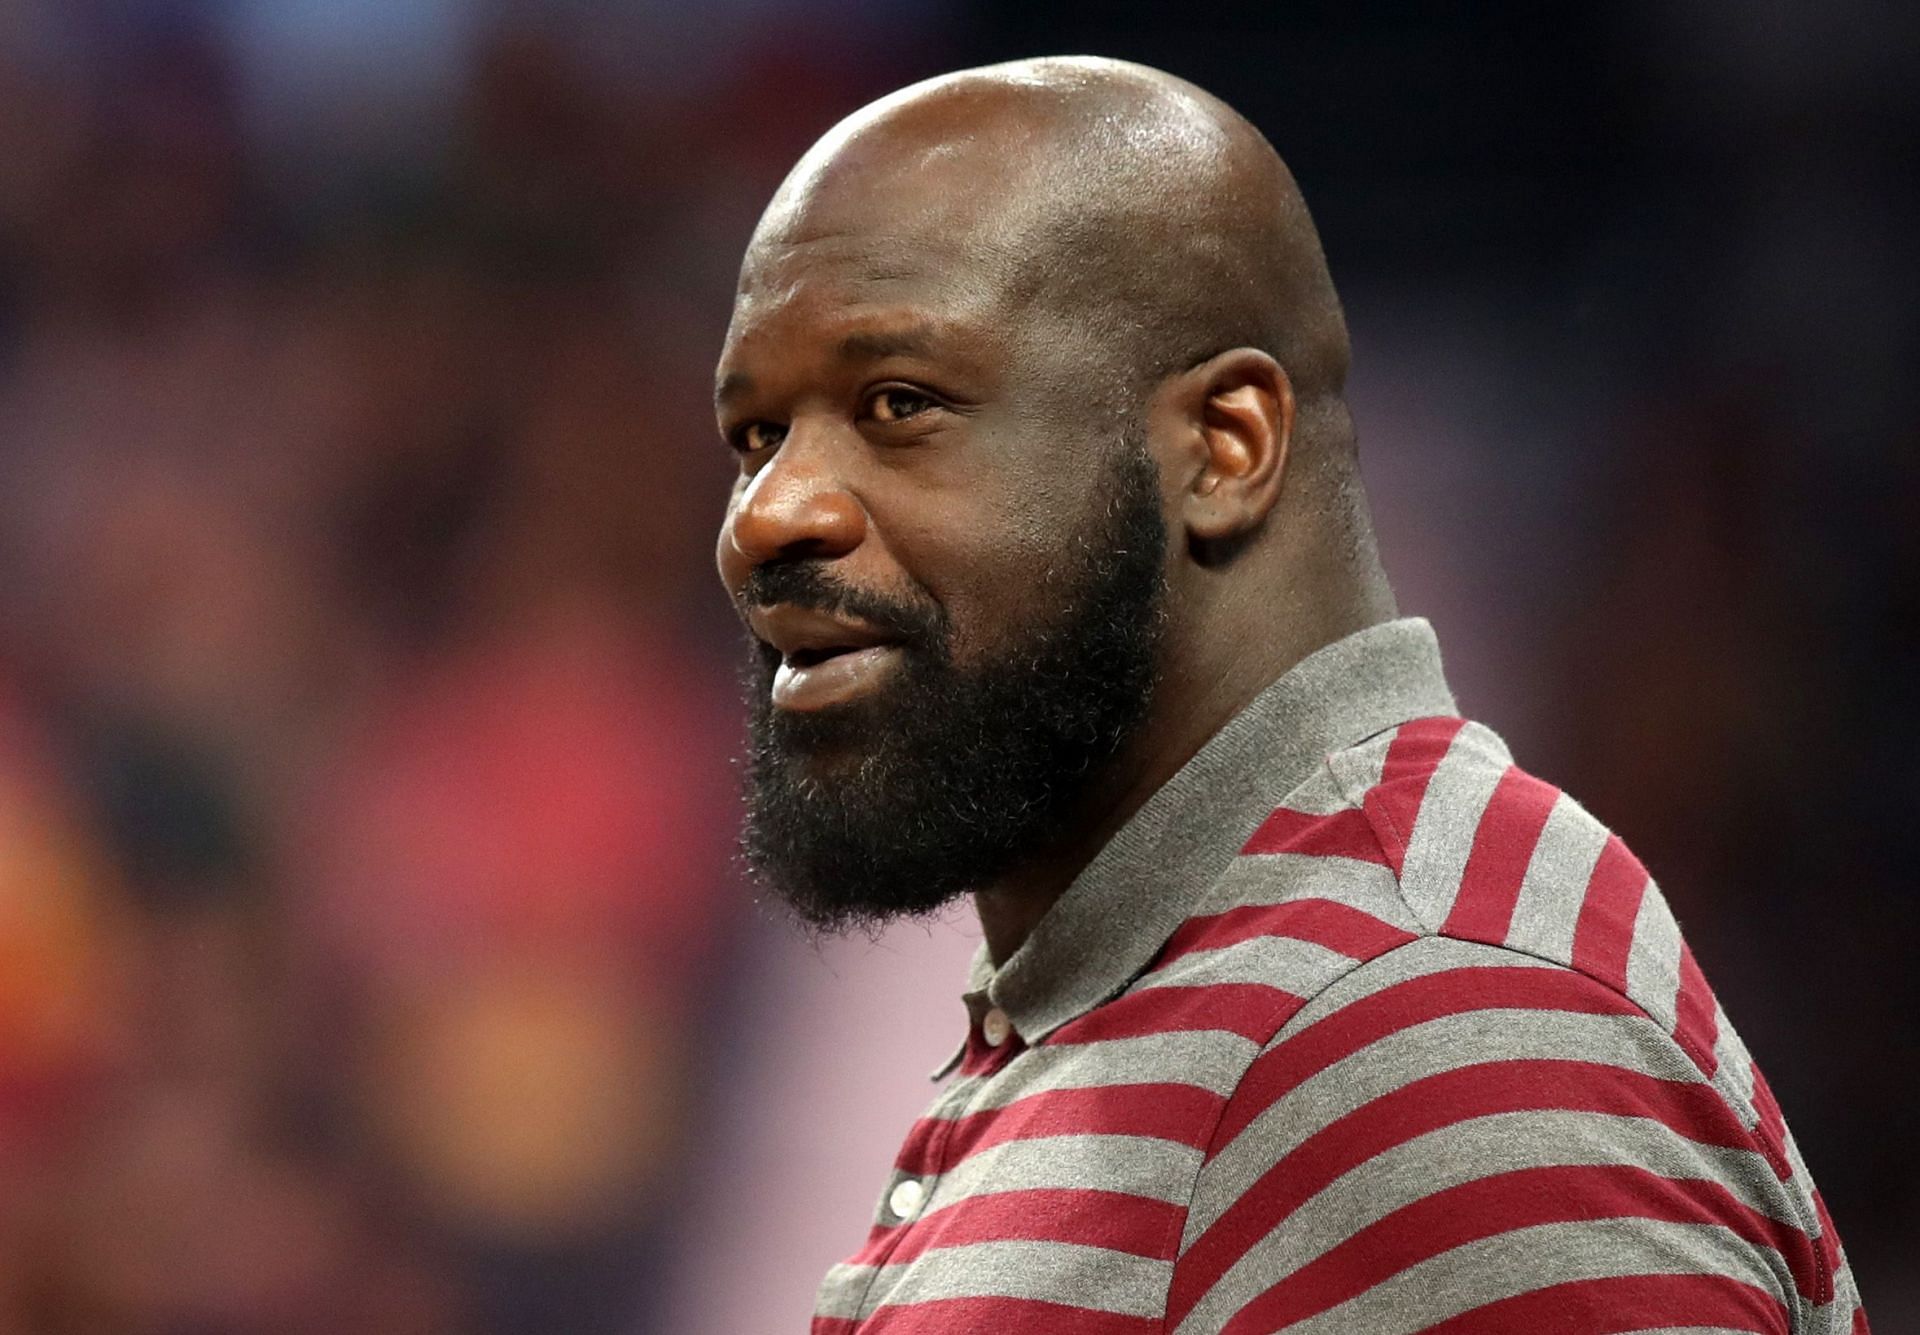 Shaquille O'Neal aux Jeux NBA d'Abu Dhabi 2022